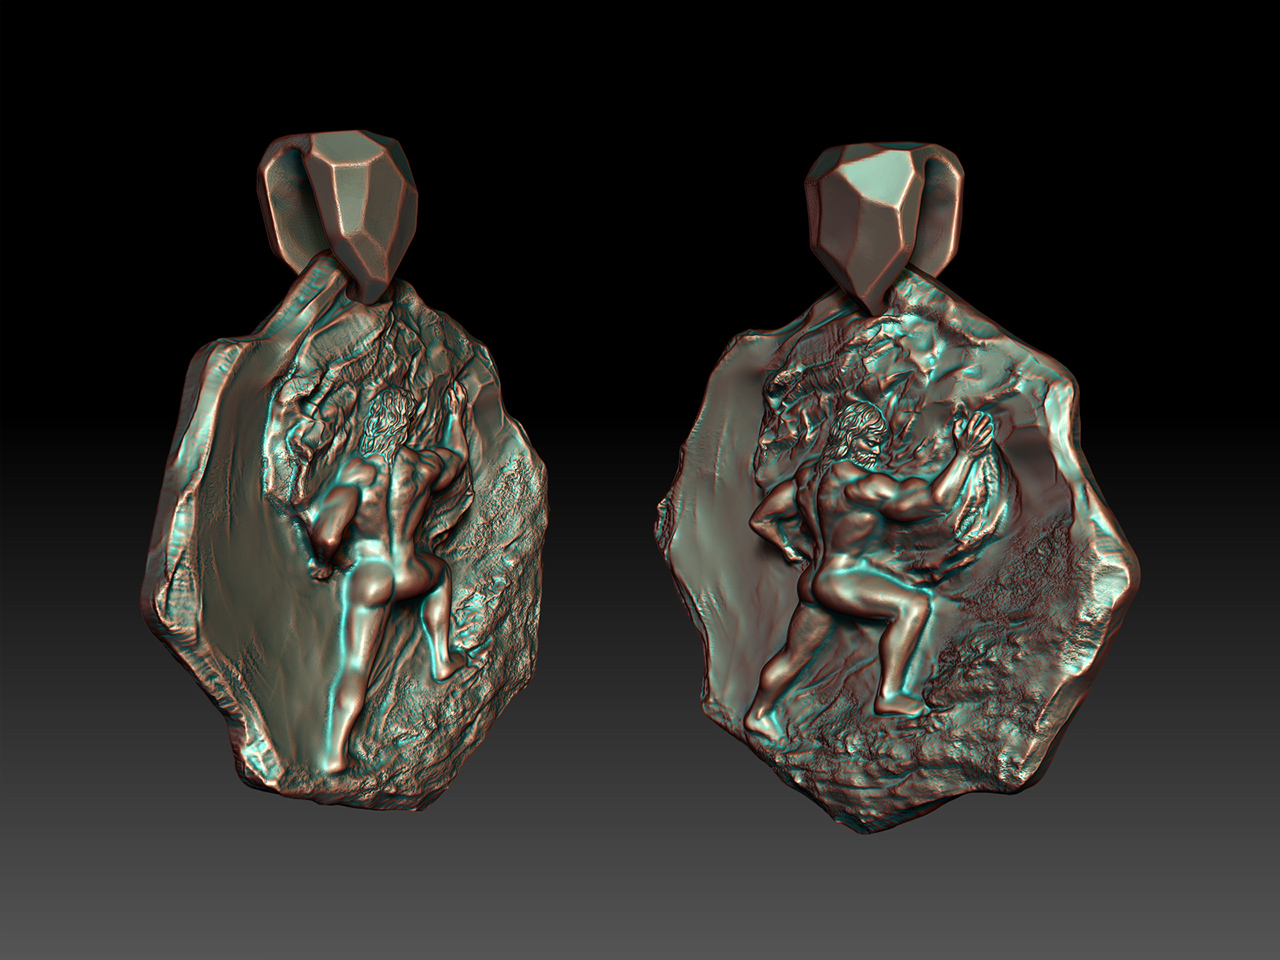 Sculptural Pendant with Relief of the mythical Sisyphus. Custom Jewelry Design.